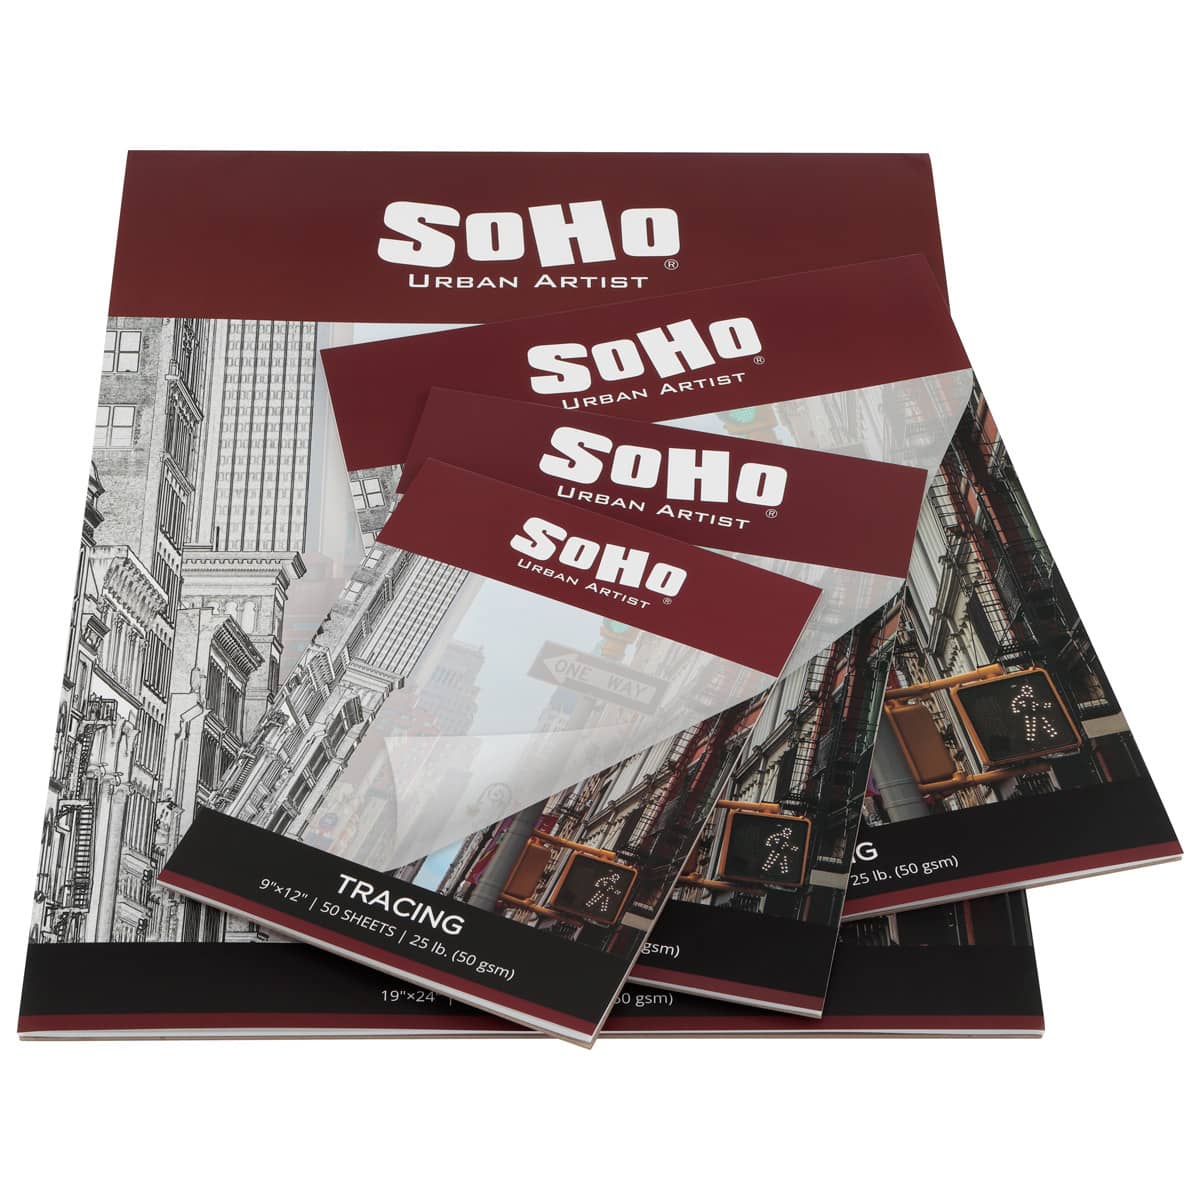 SoHo Tracing Paper Pads